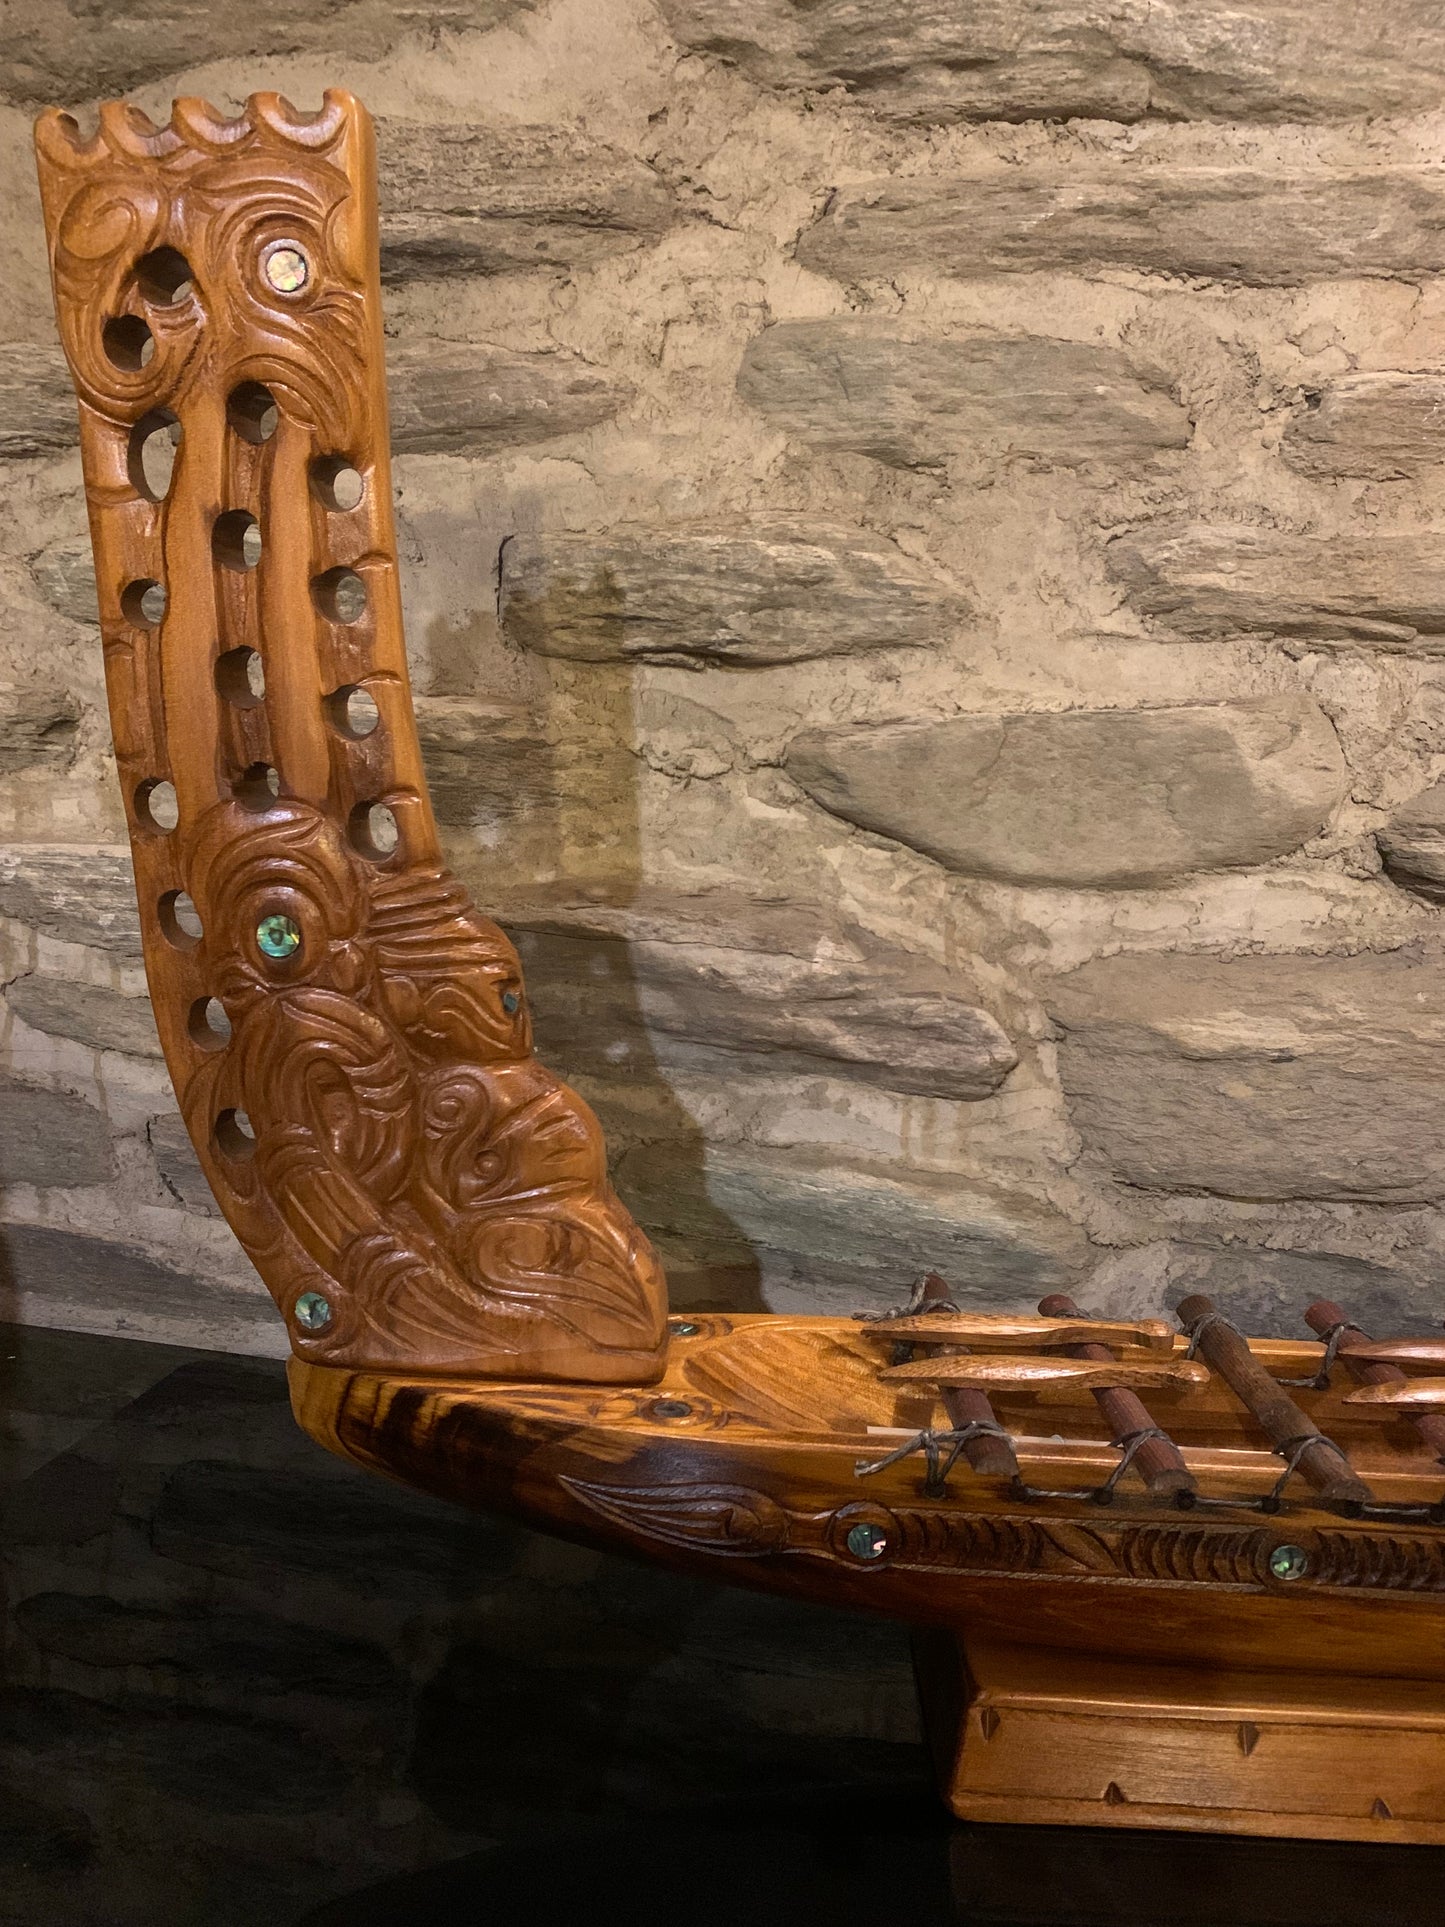 stern view of Maori waka taua war canoe carved in New Zealand and available from Silver Fern Gallery